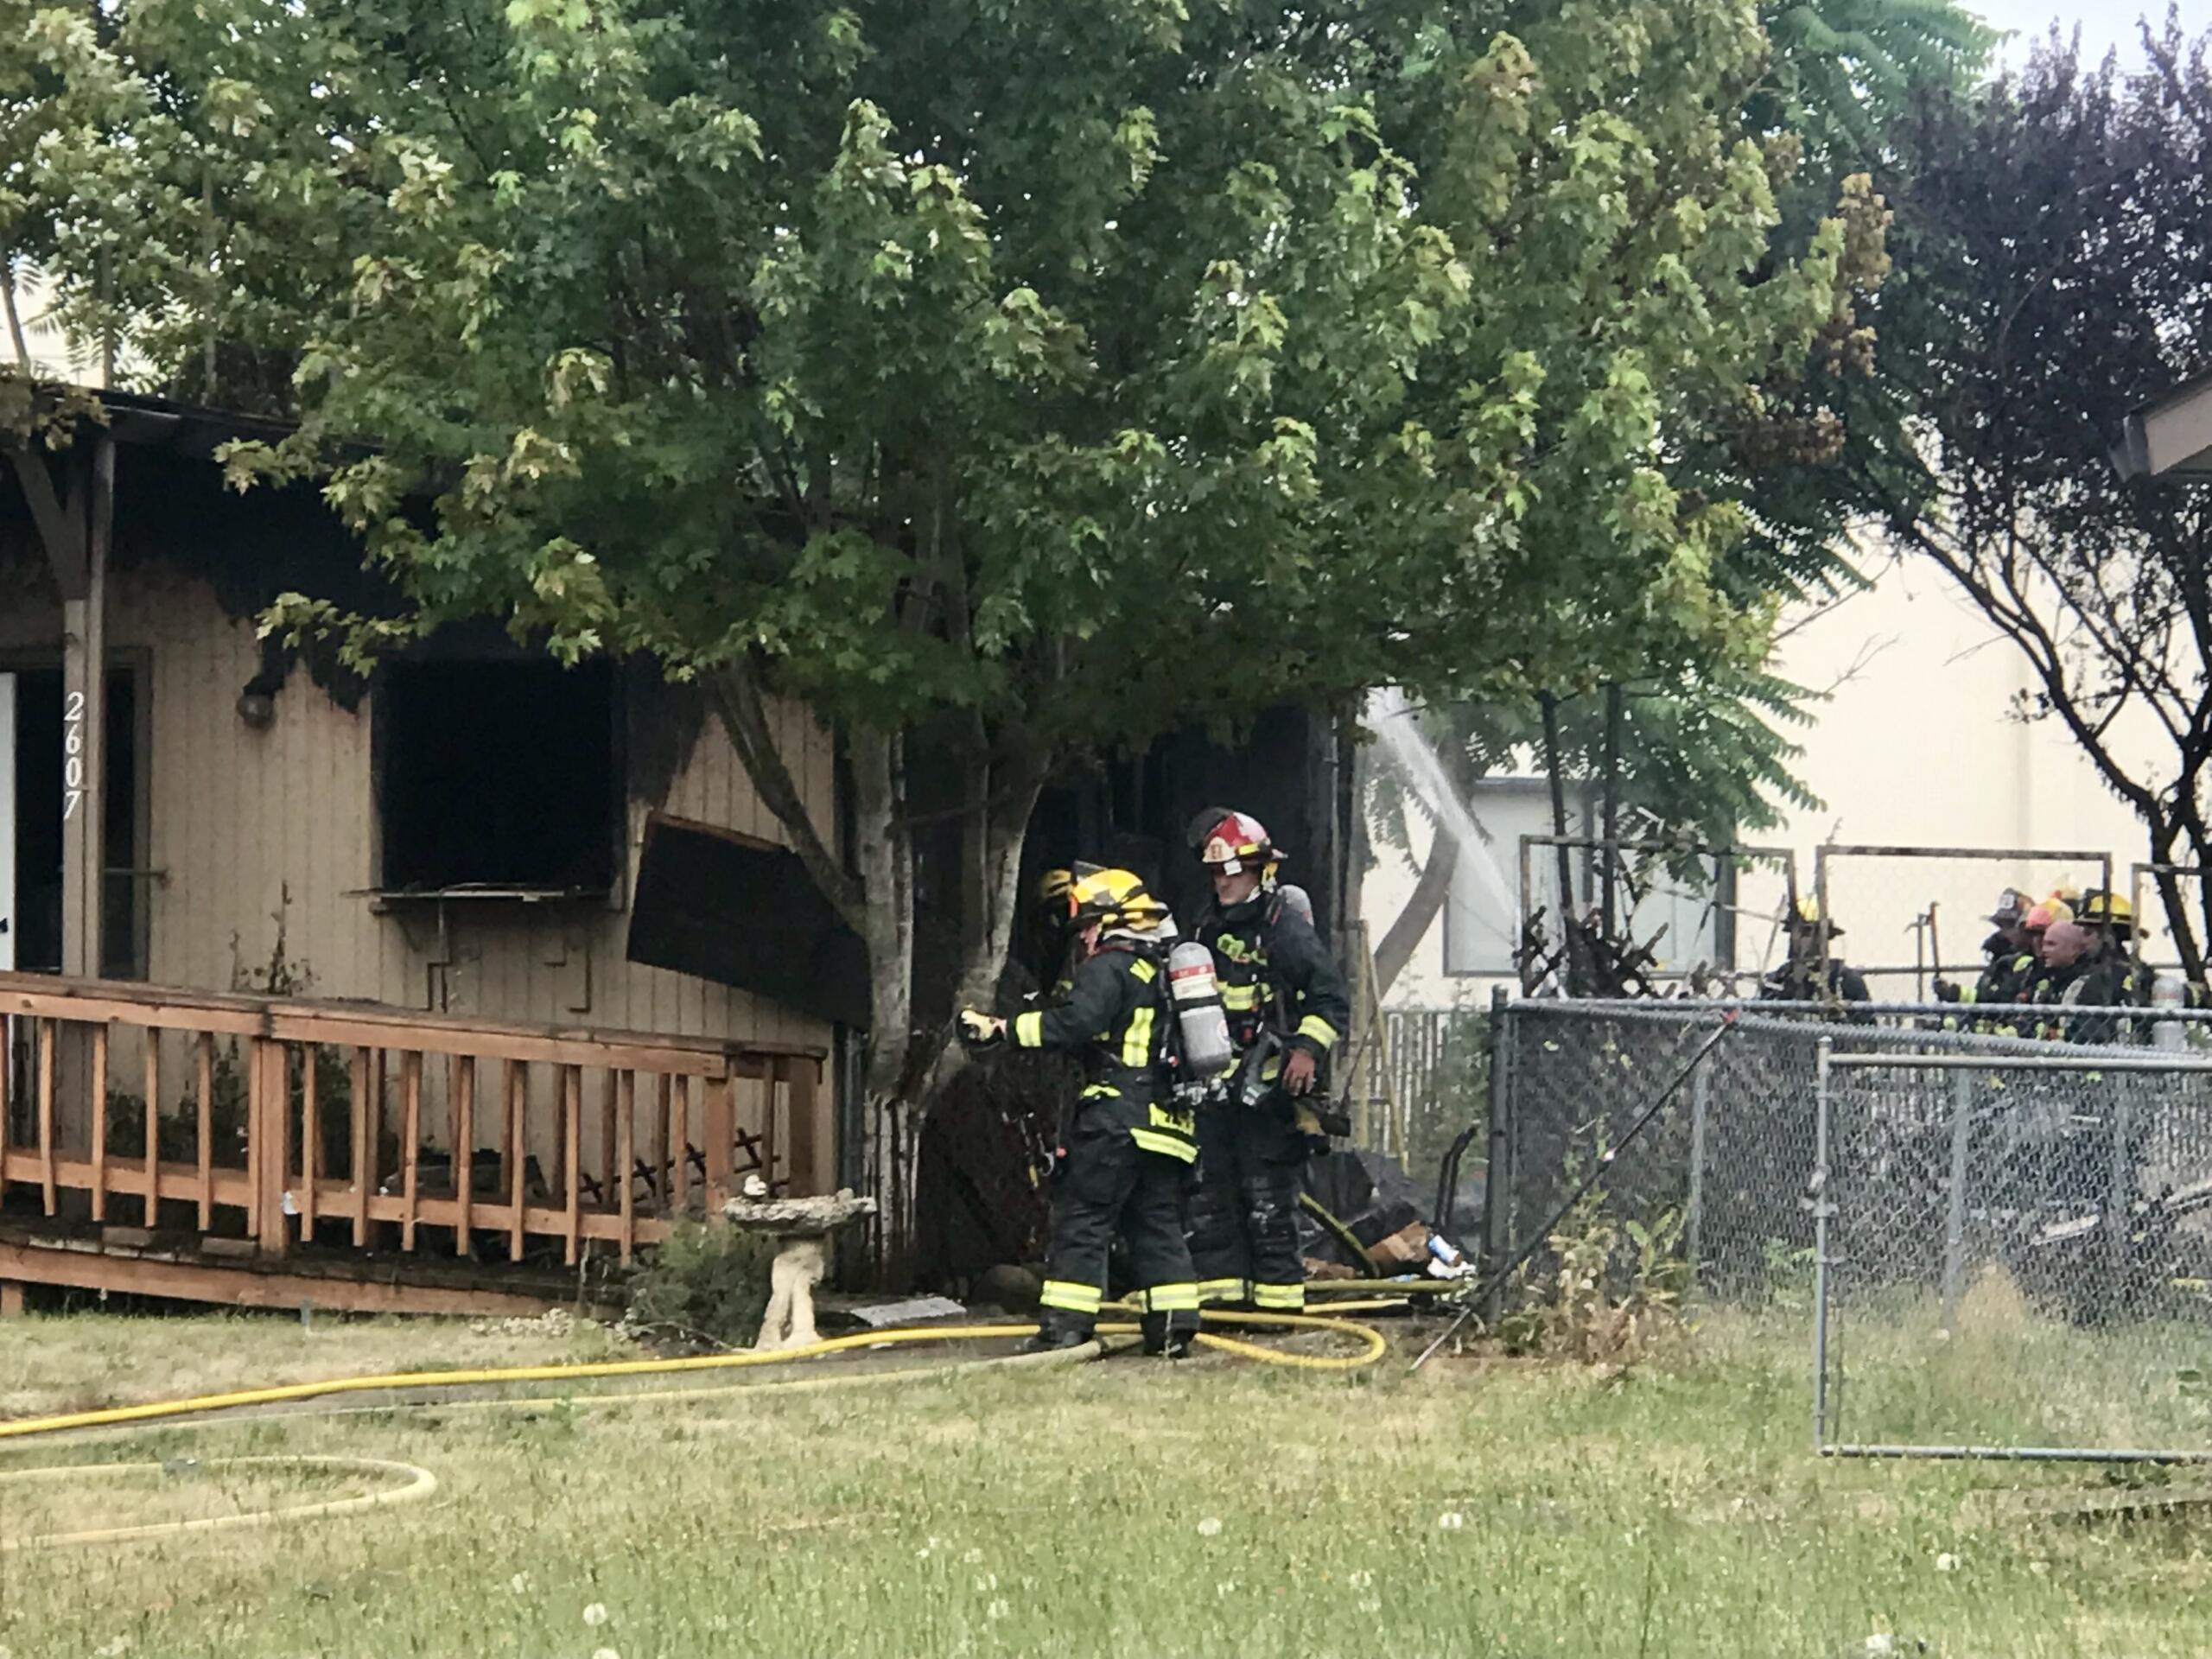 Vancouver firefighters were dispatched at 5:17 p.m. for a report of a residential structure fire at 2607 E. 21st St. The caller reported flames and smoke coming from the front windows of the residence.